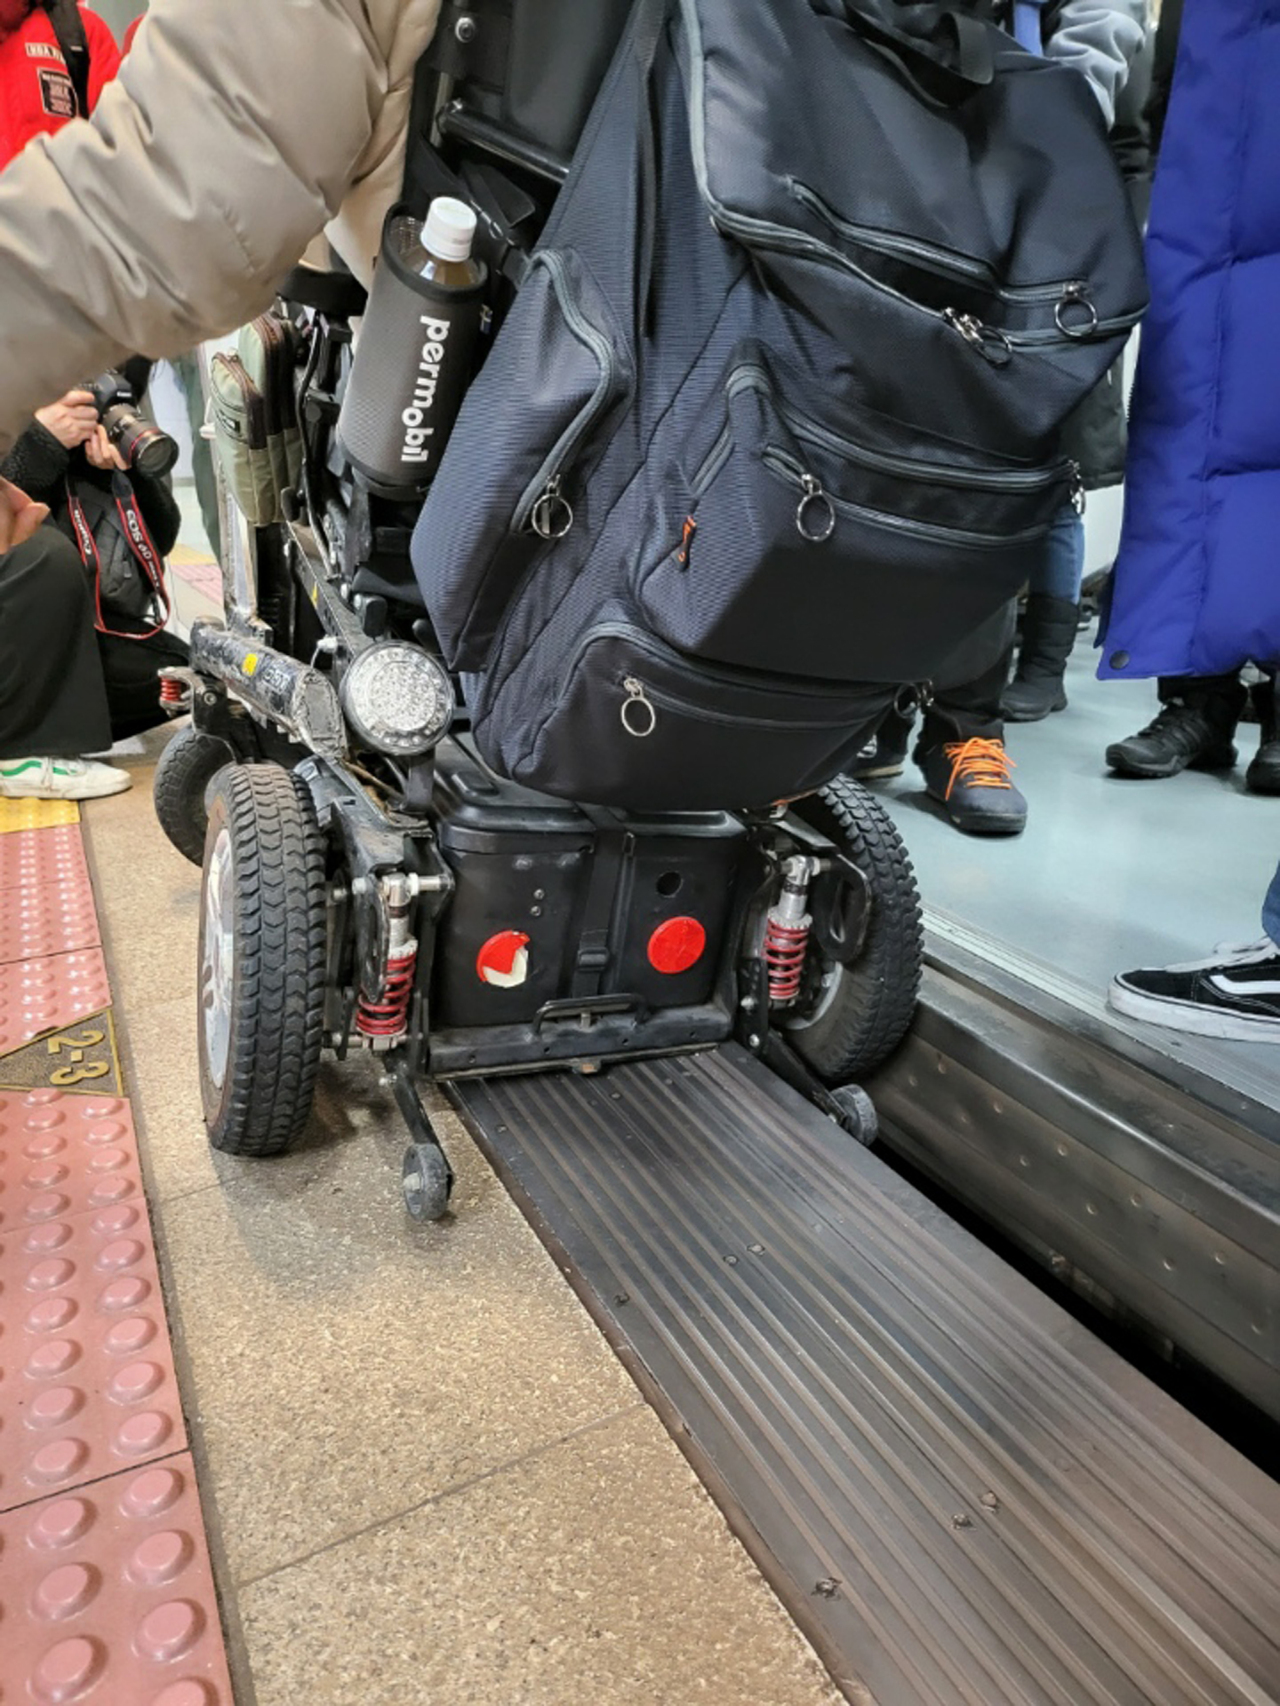 A member of the Solidarity against Disability Discrimination stages a protest by putting his wheel into the gap between a train car and the edge of a station platform at a station on the Seoul Subway Line 5, Monday. (Yonhap)